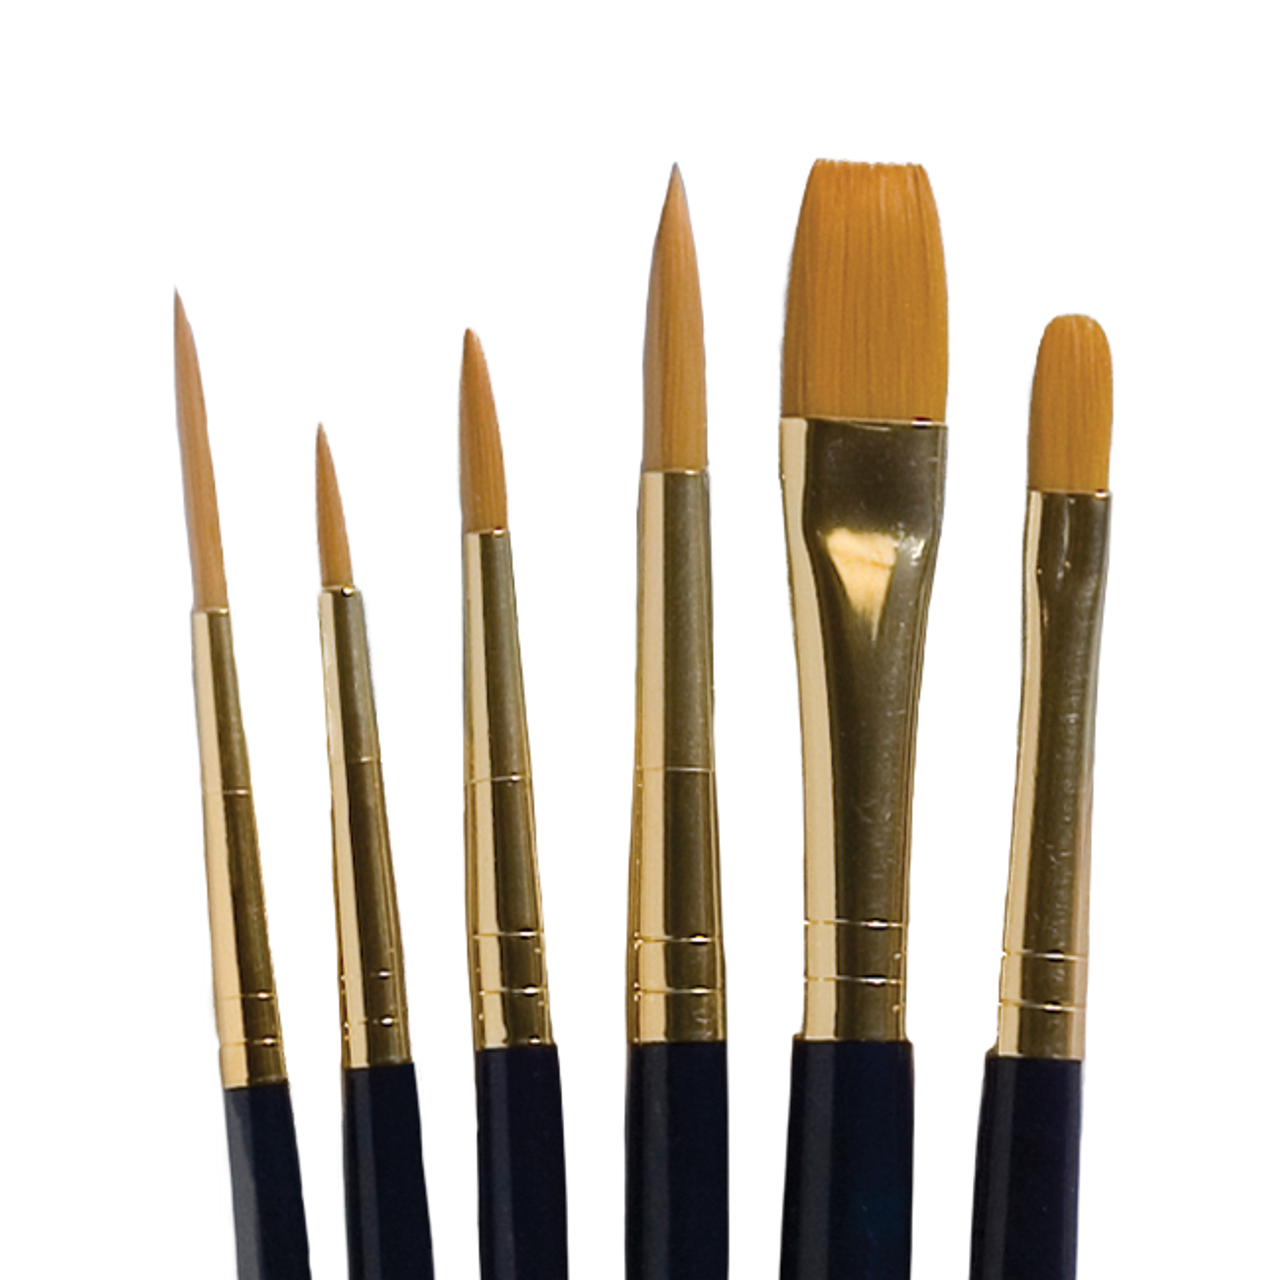 Buy Princeton Taklon Synthetic Sable 4350 Series Paint Brushes